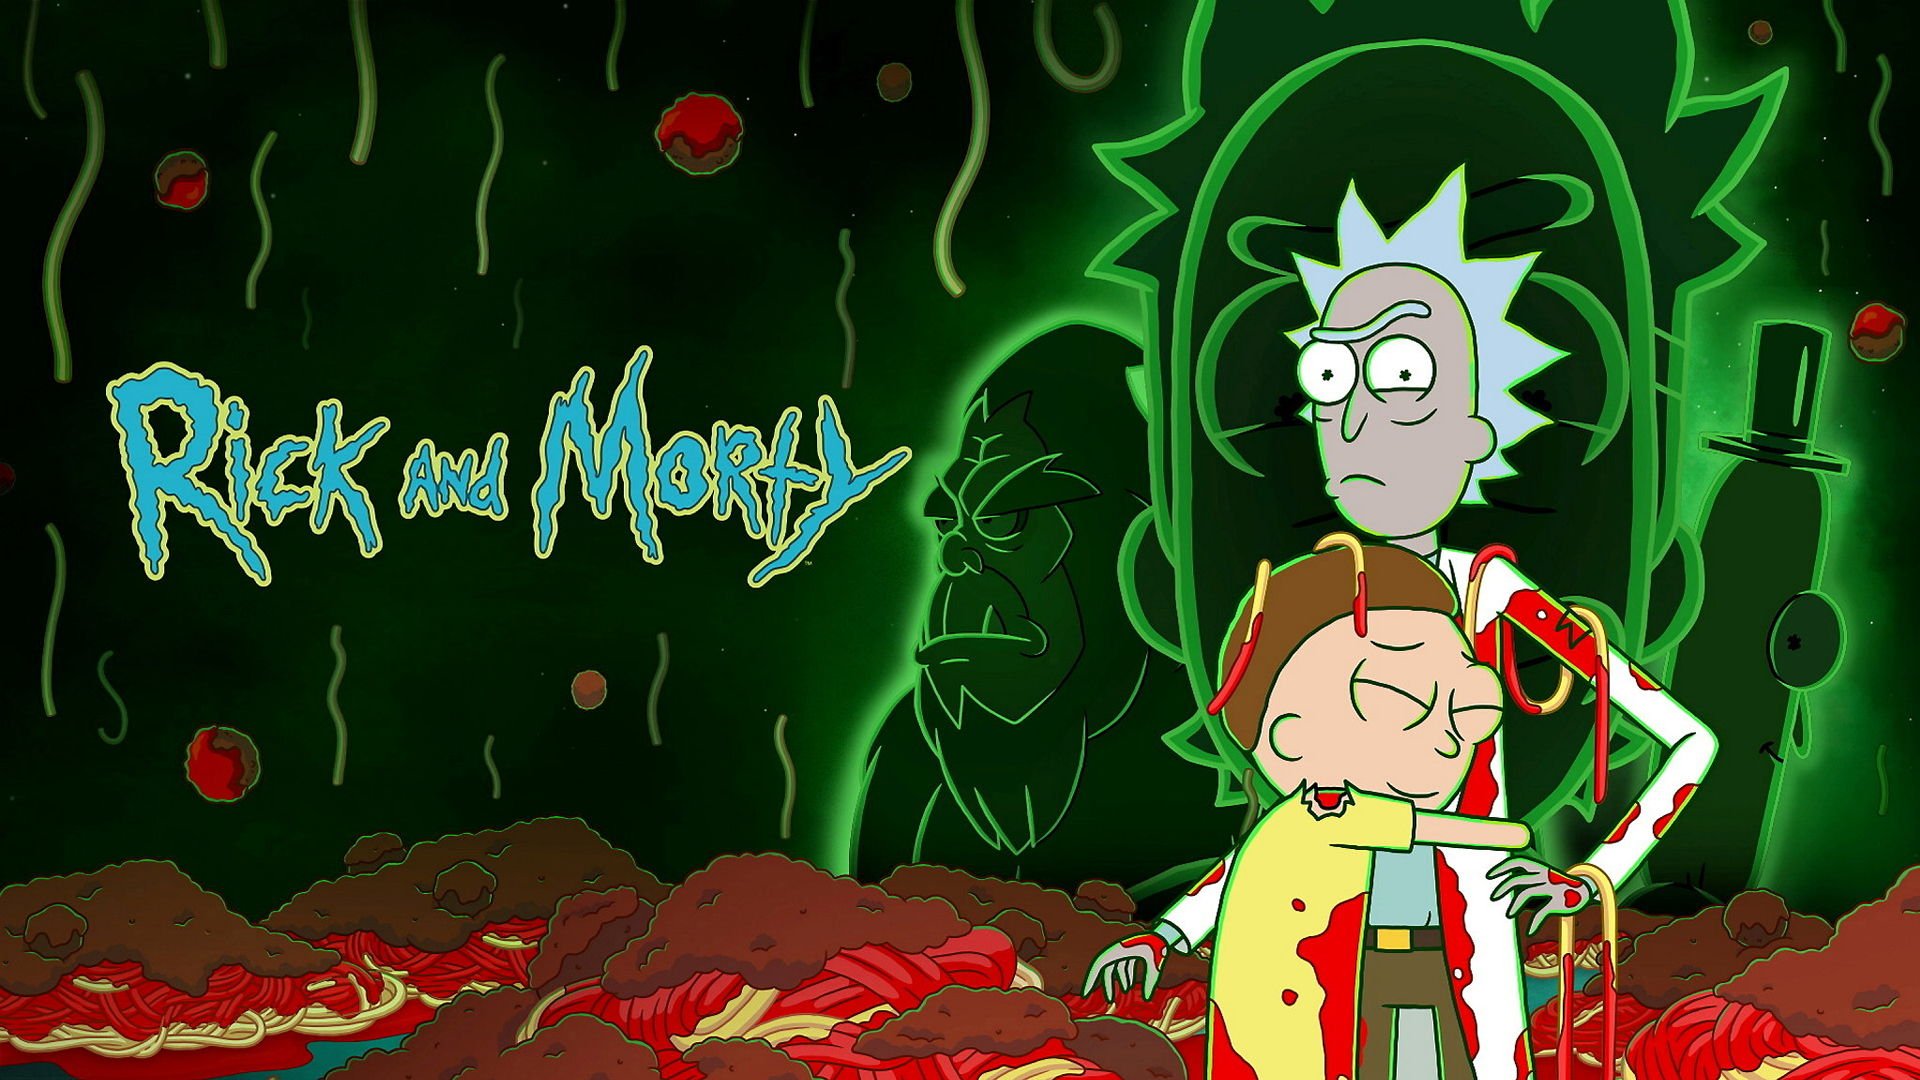 rick-and-morty-staffel-6-episode-1-online-streamen-wow